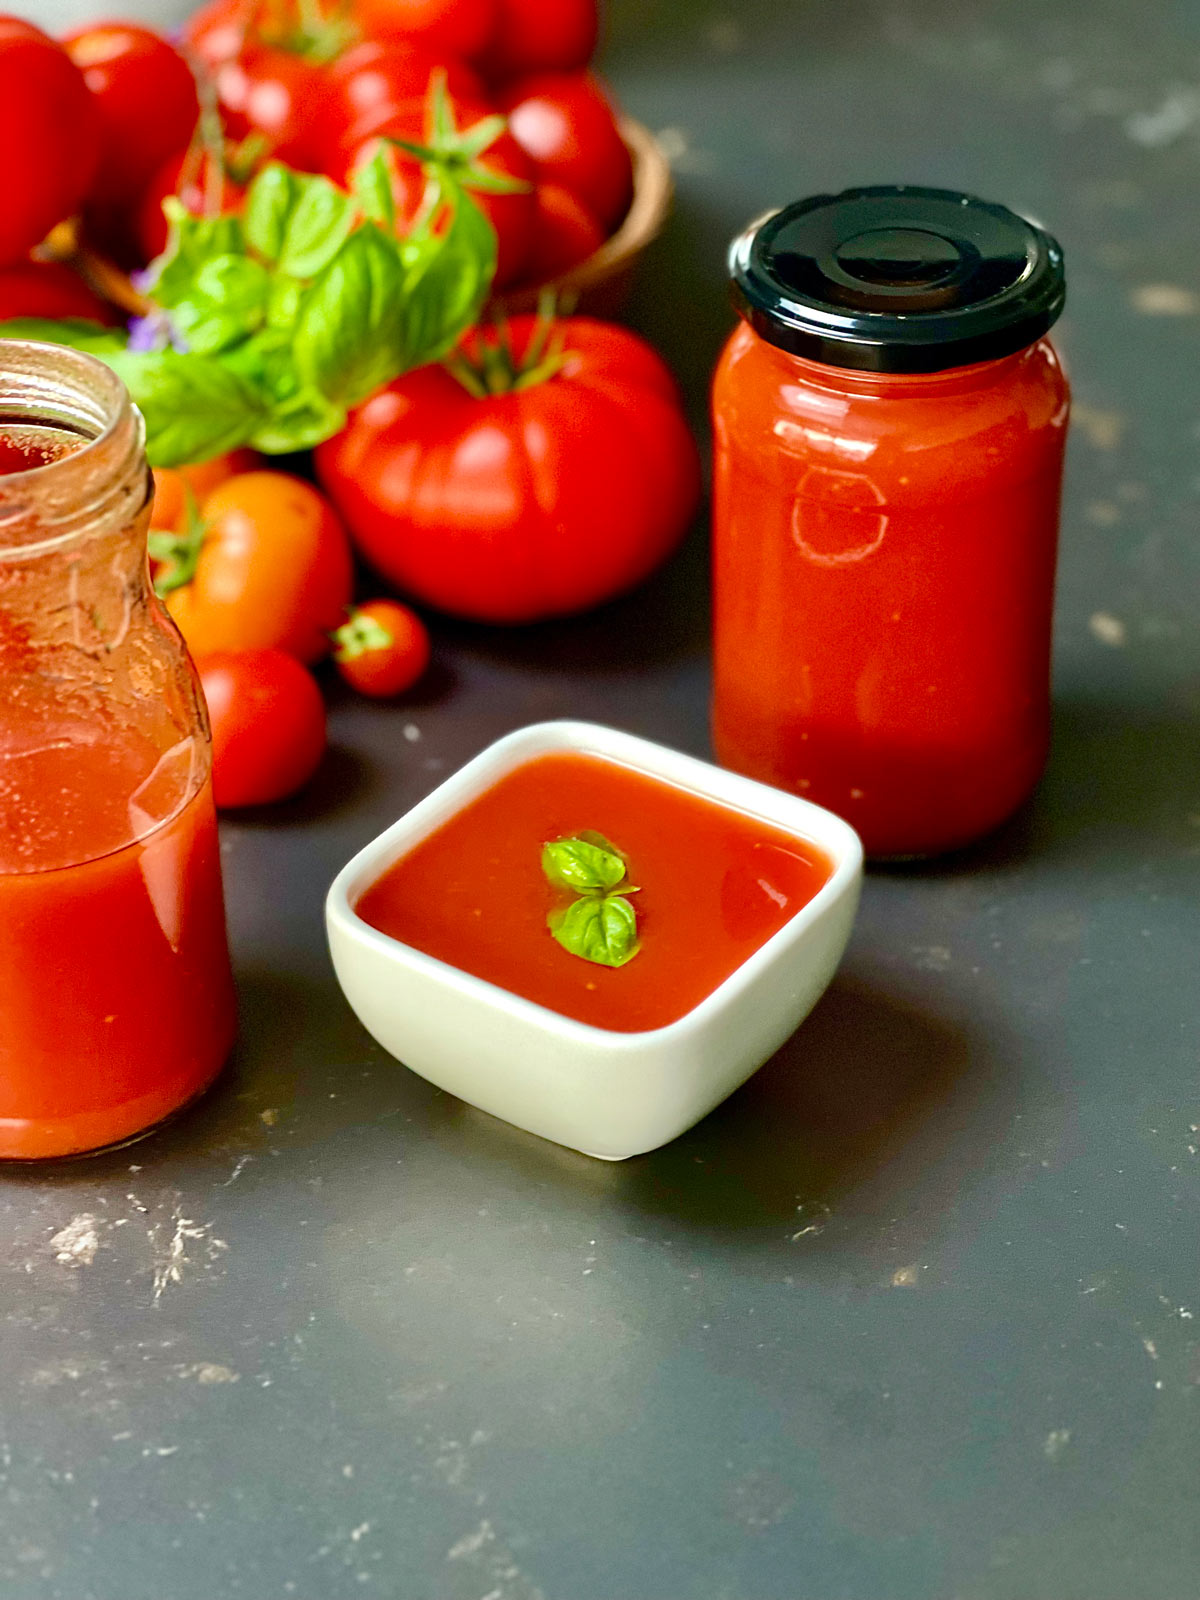 Half full jar to the left, fresh tomatoes and basil further up, a passata jar full to the right and a small dish containing passata si pomodoro and a basil leaf.